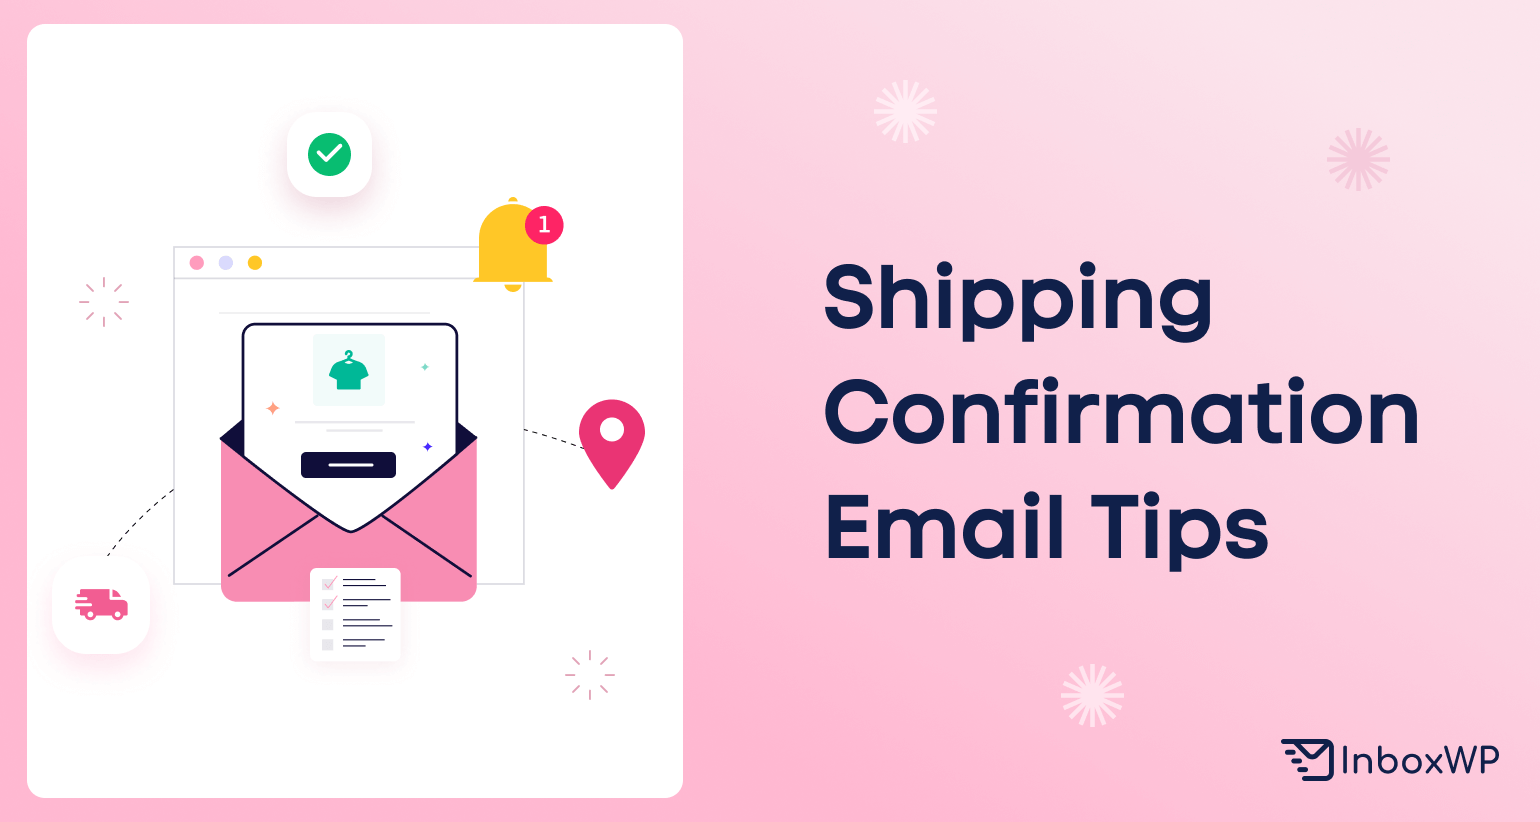 Shipping Confirmation Email Tips